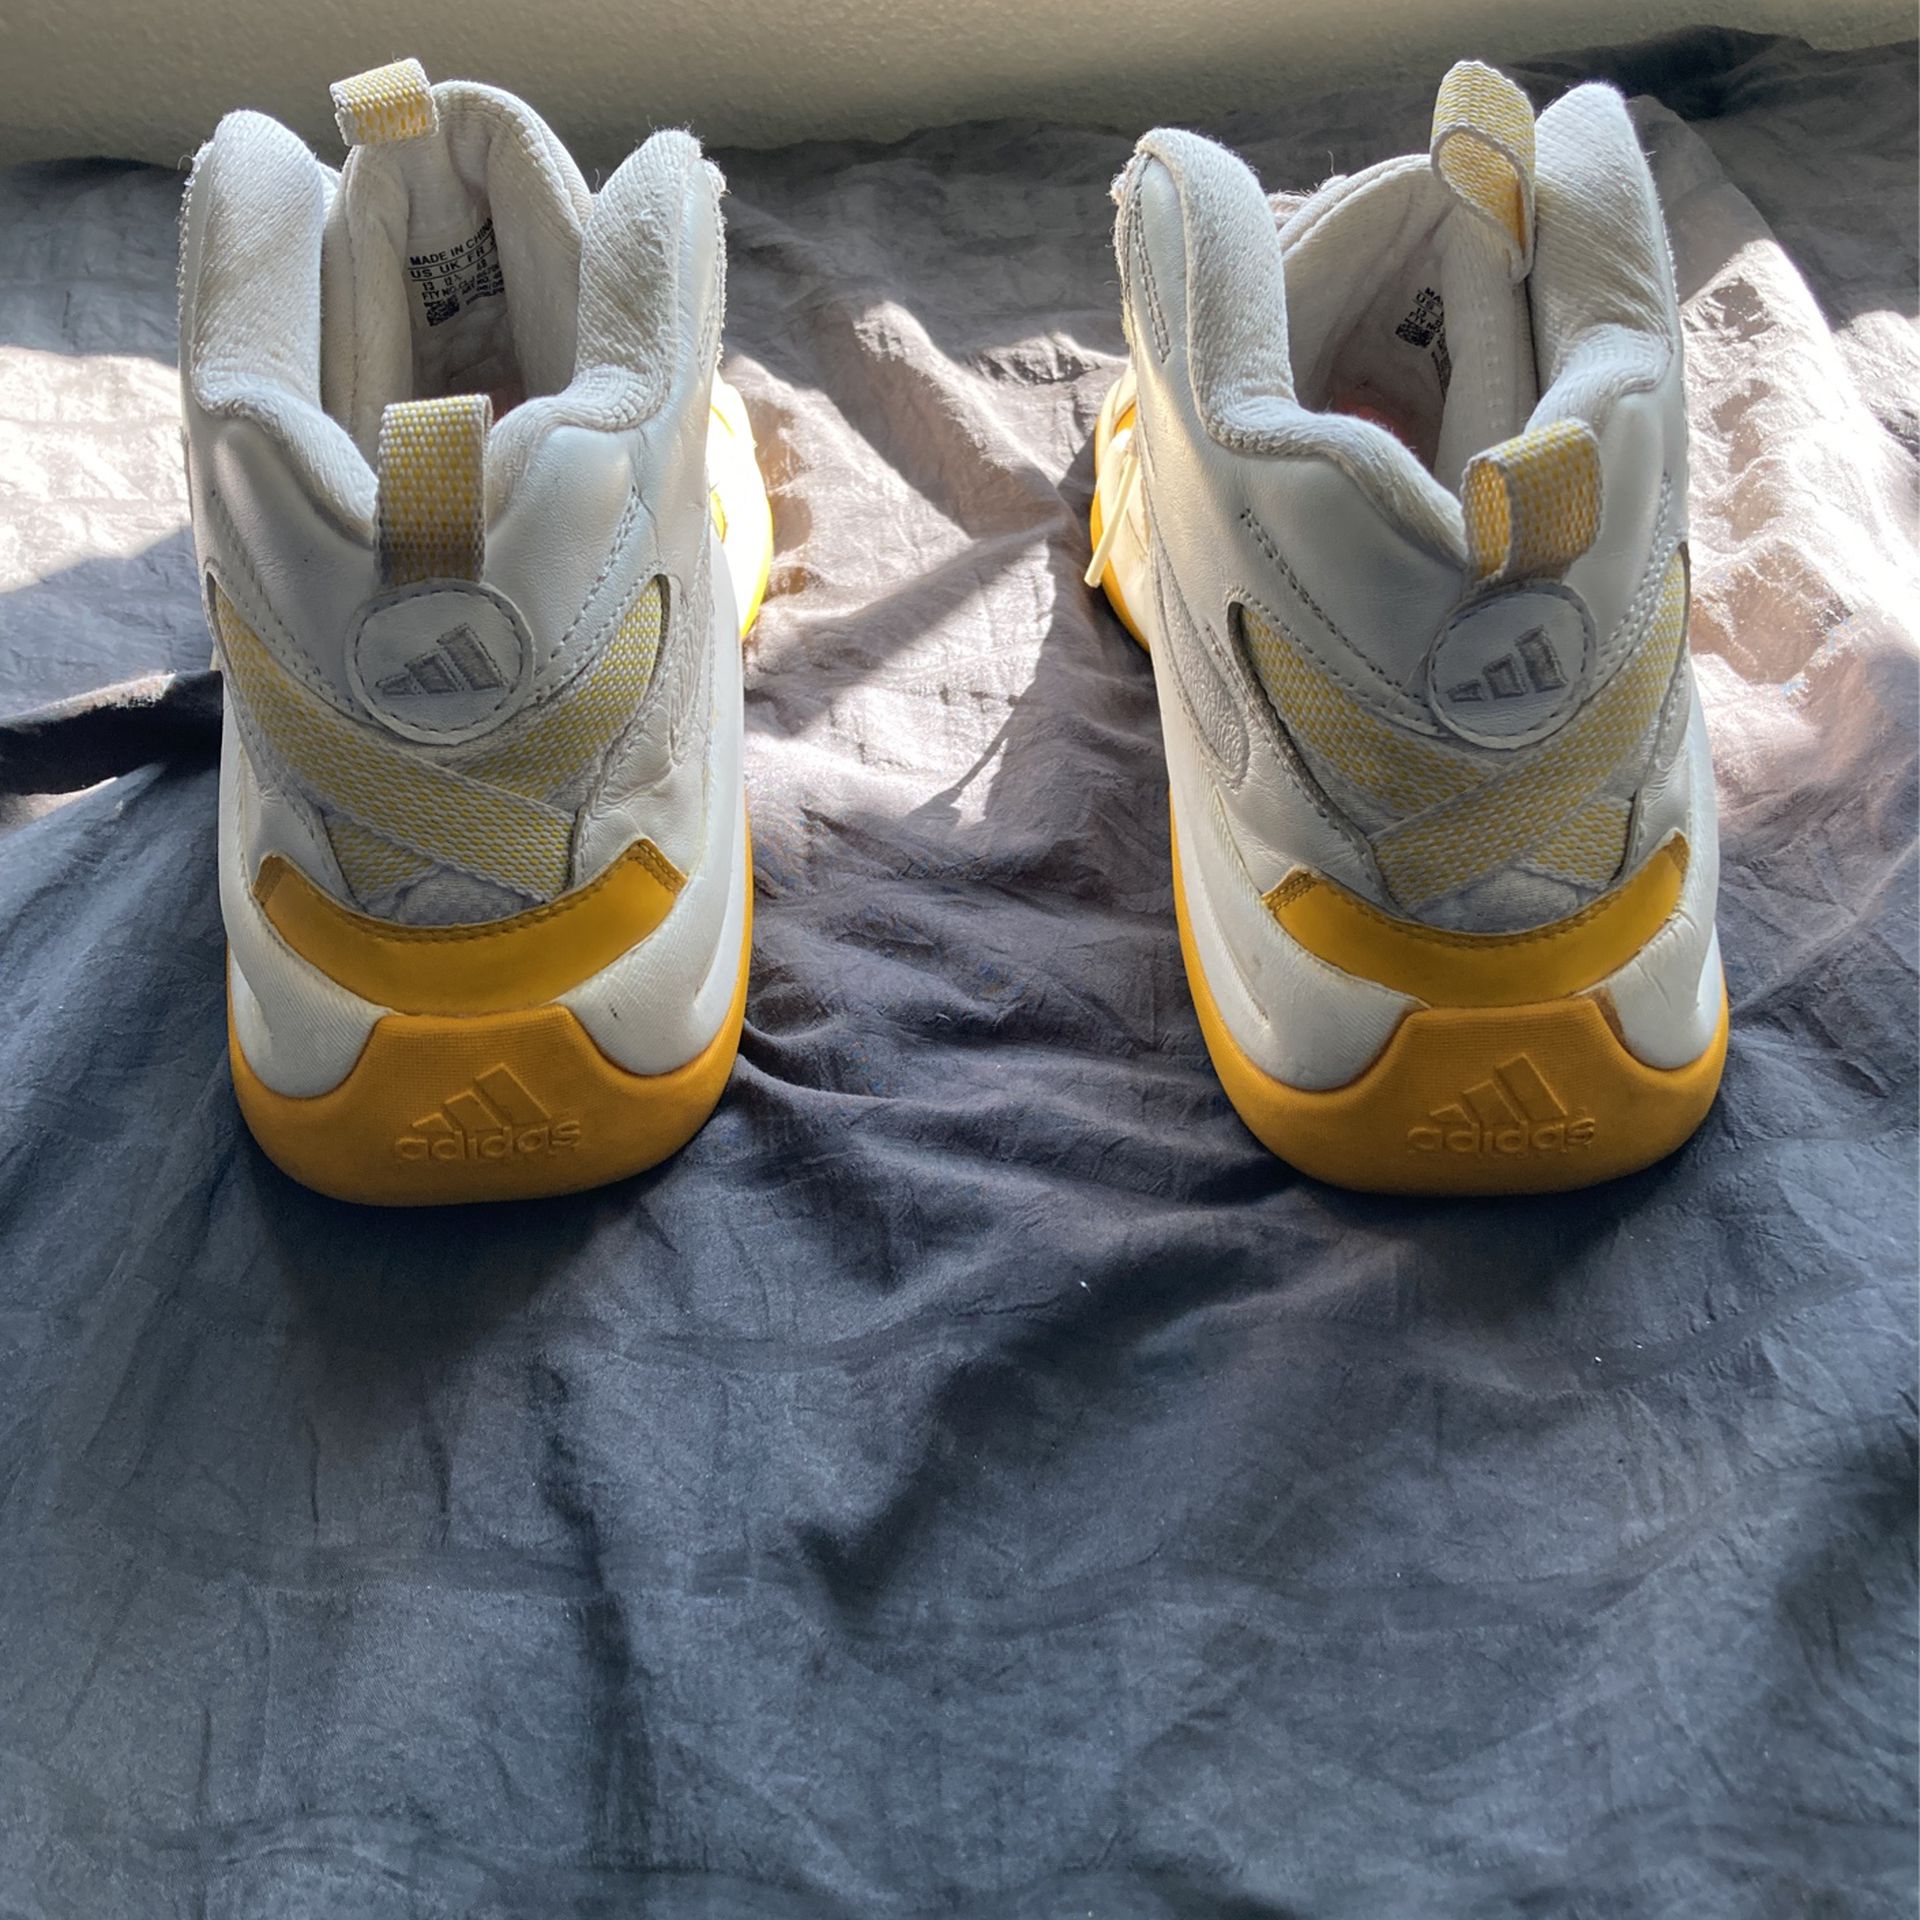 Adidas Lakers Kobe Bryant 8 Hardwood Classics Size Small for Sale in  Tustin, CA - OfferUp